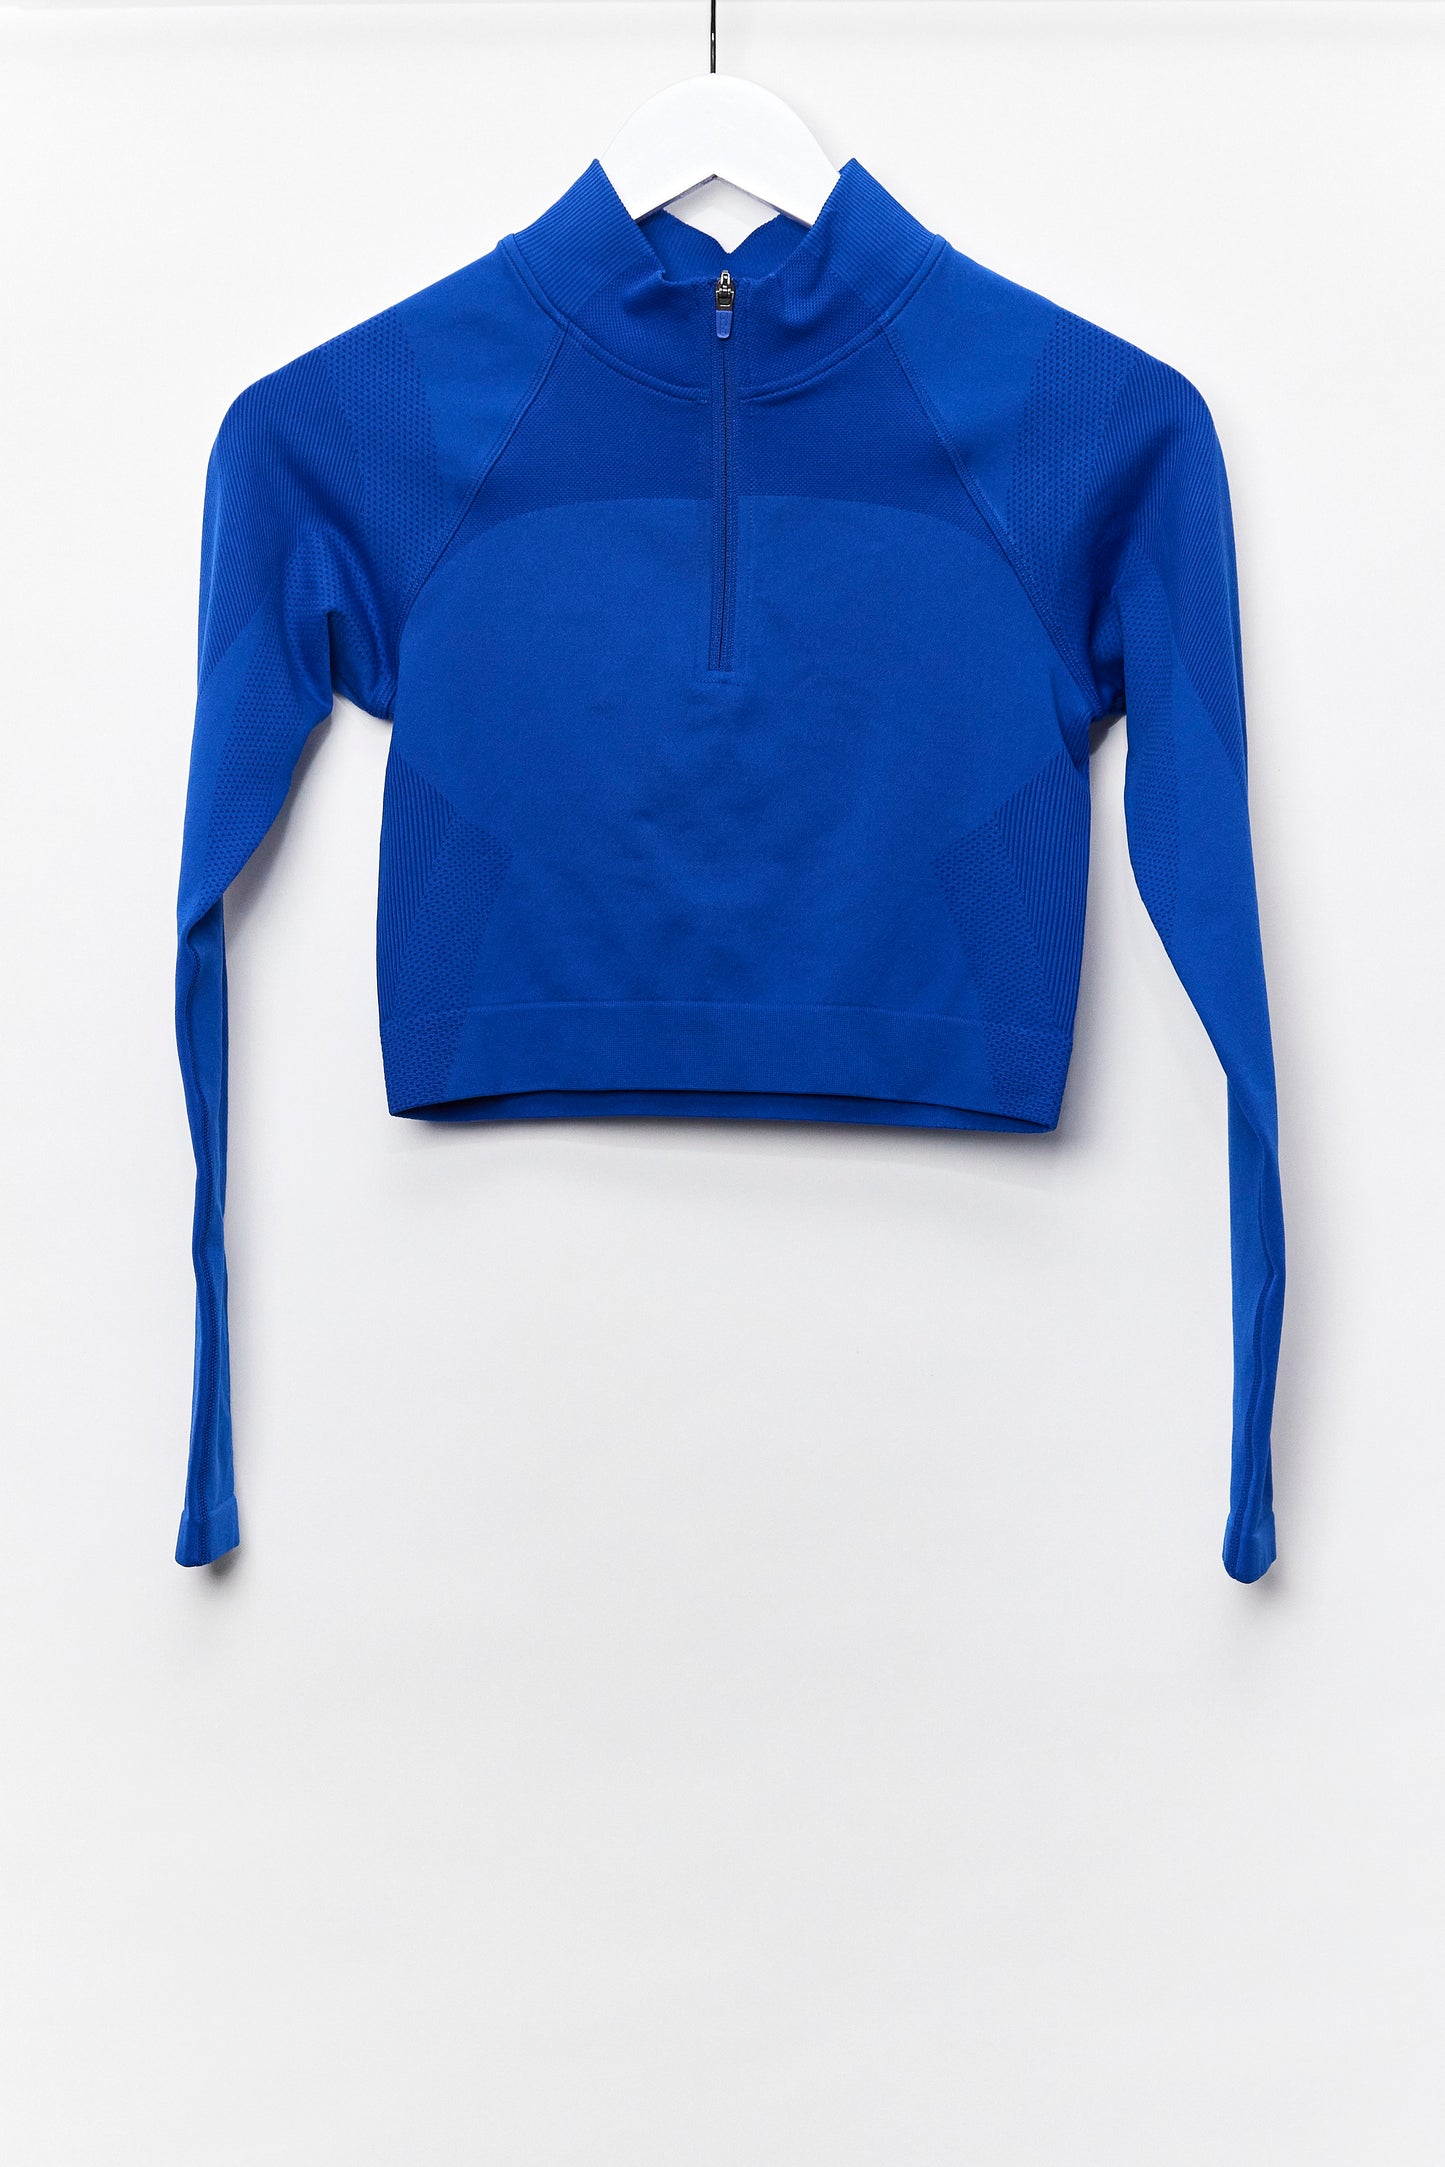 Womens ASOS Blue Cropped sport top size Small